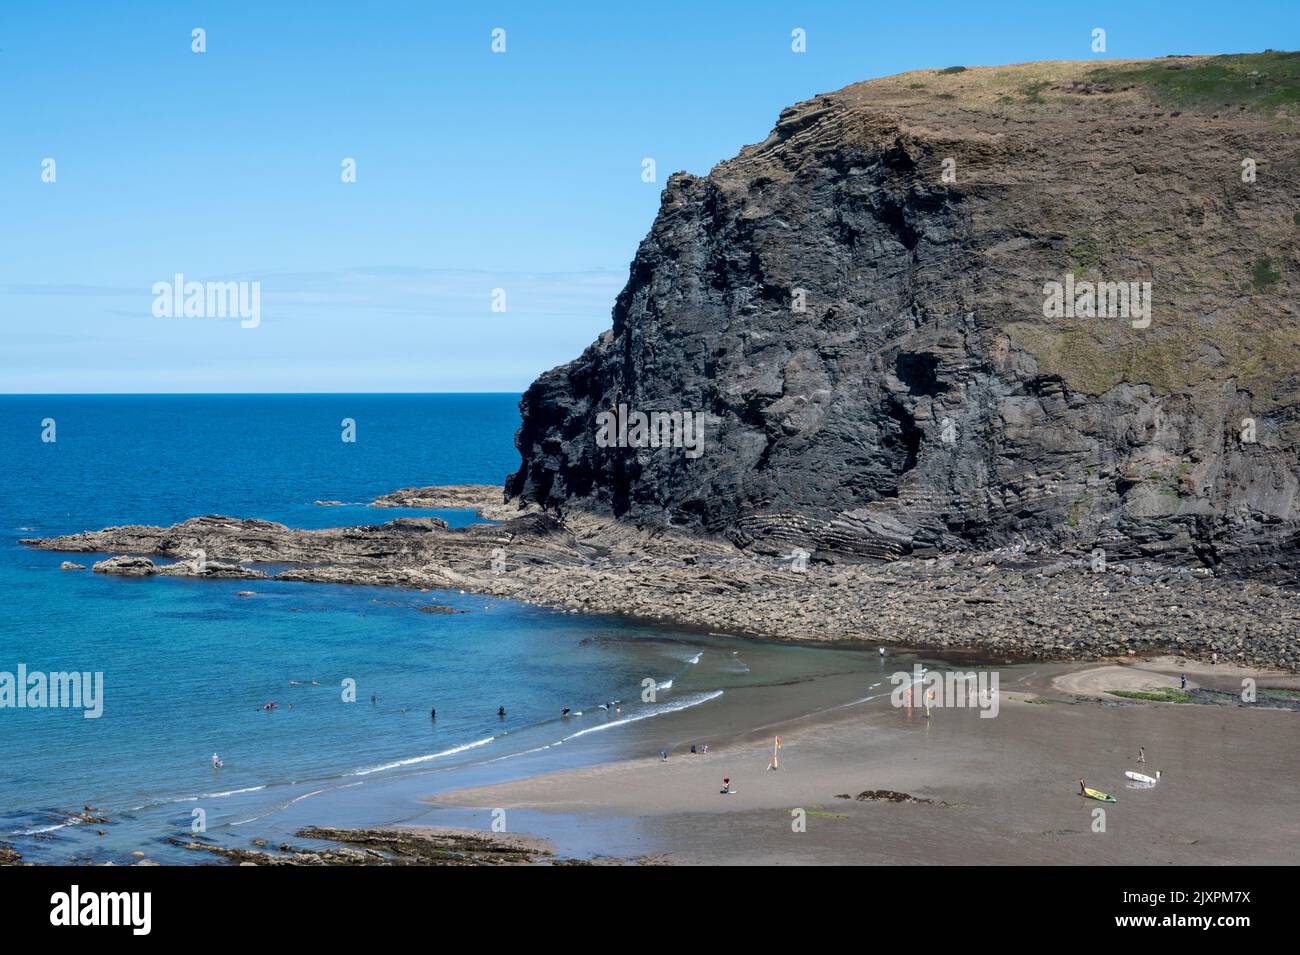 View of Crackington Haven Beach with holidaymakers enjoying the sun and sea. Stock Photo